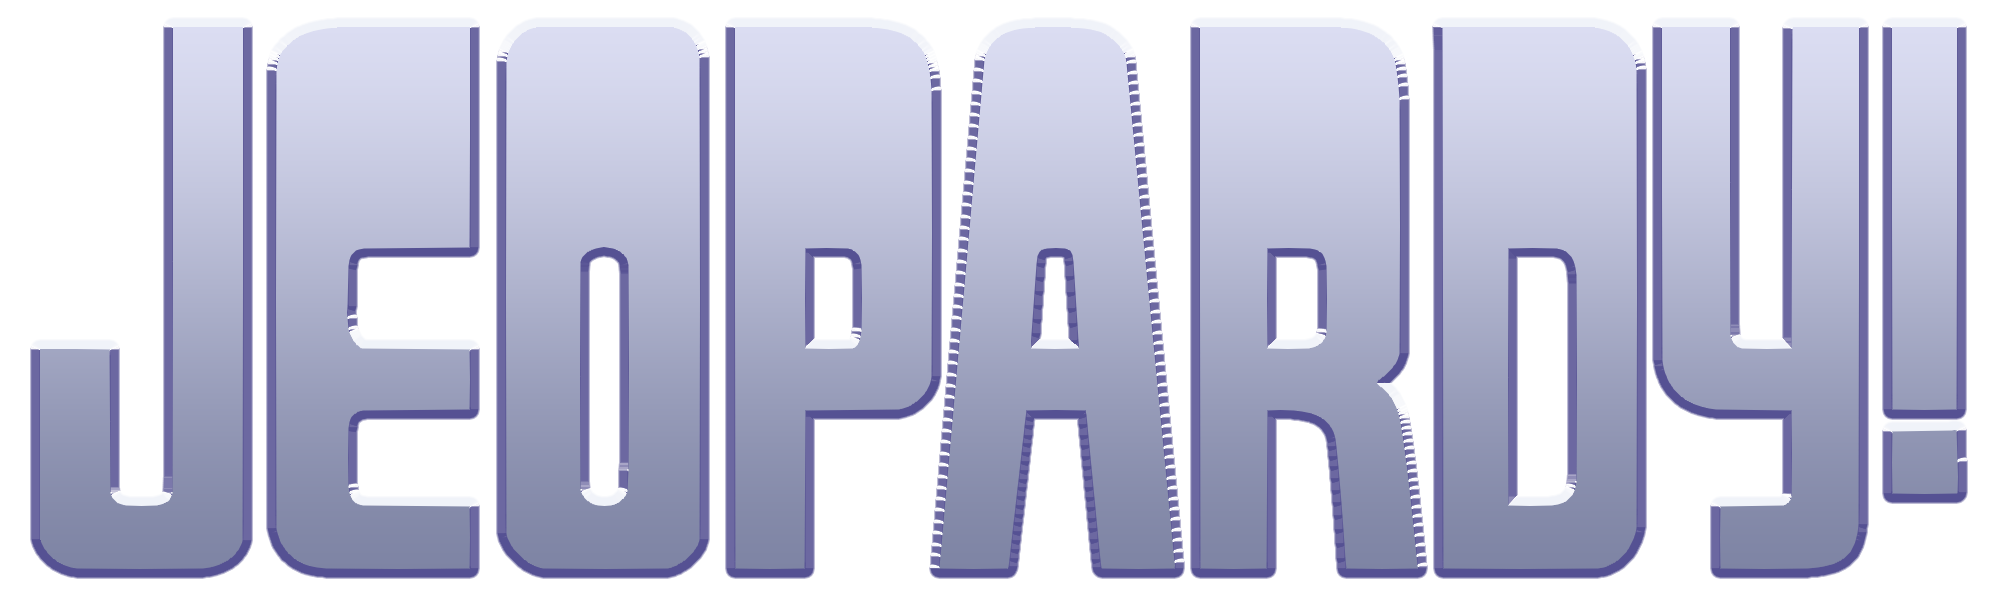 Jeopardylogo.png - Jeopardy, Transparent background PNG HD thumbnail